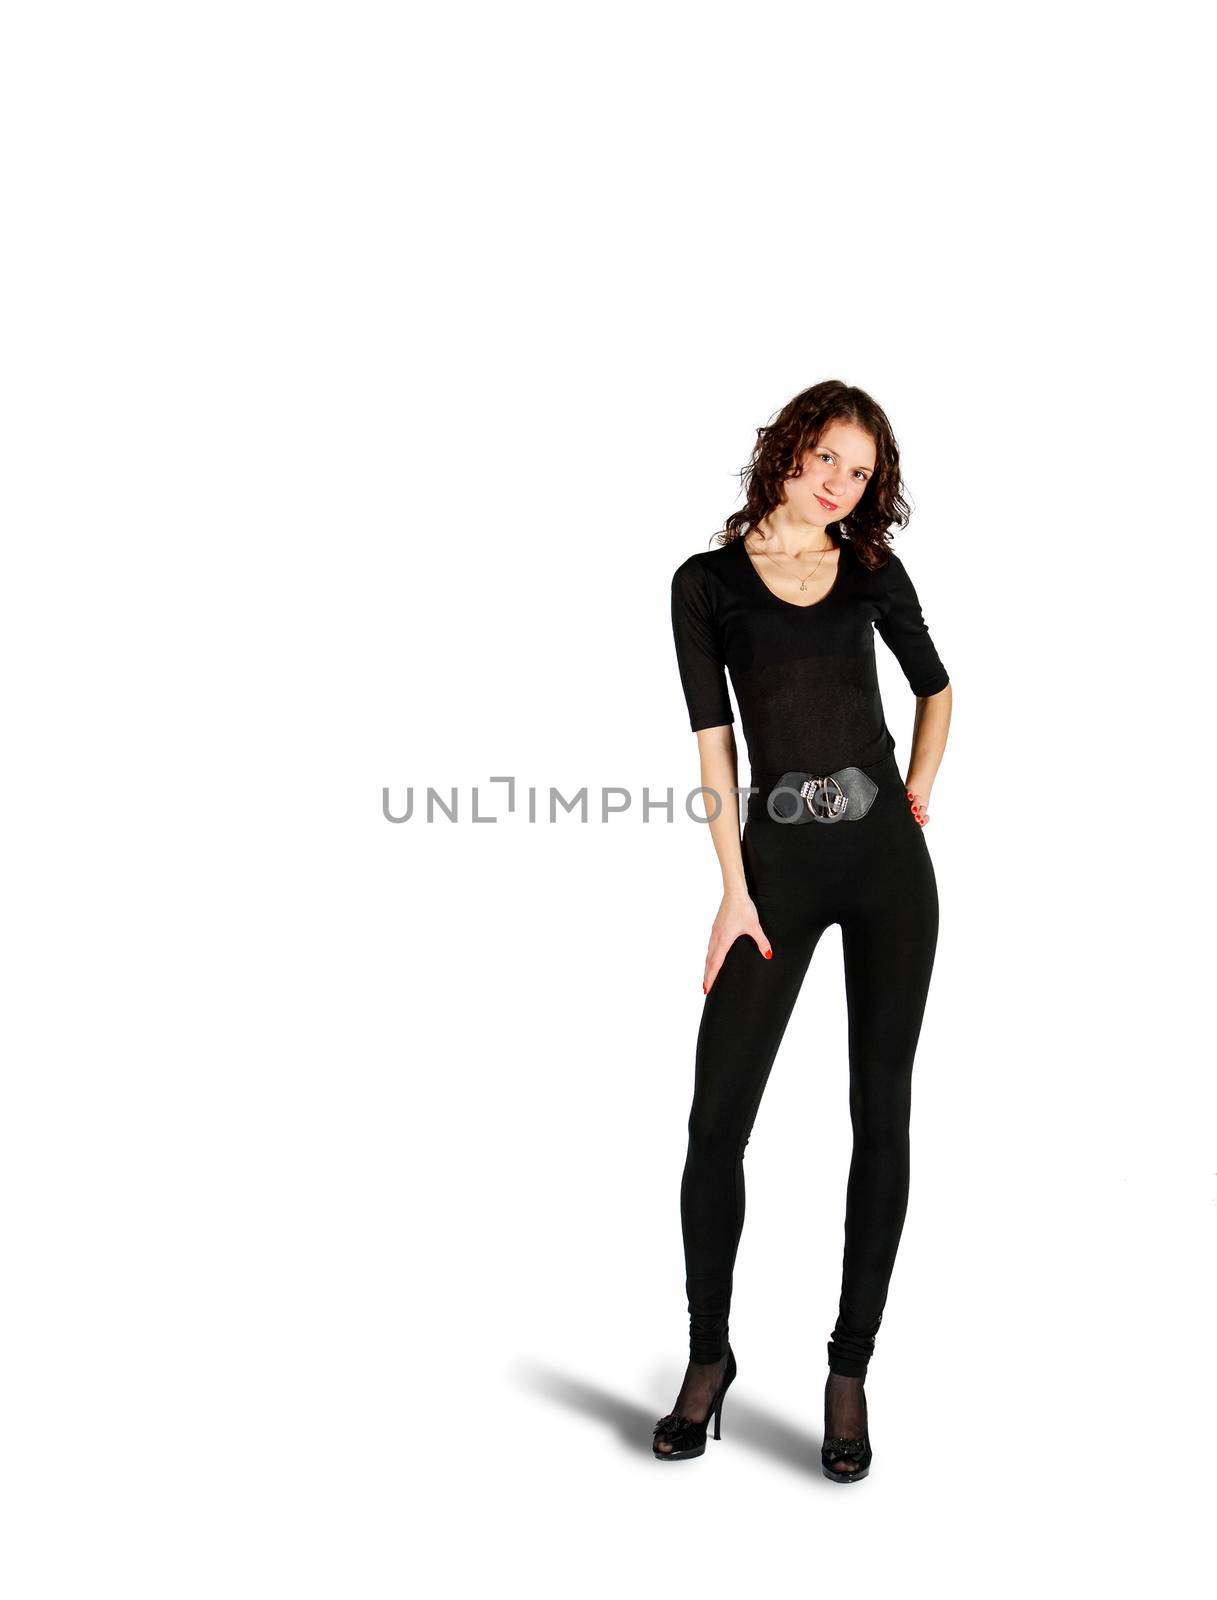 young beautiful woman in black suit posing standing in studio on white background